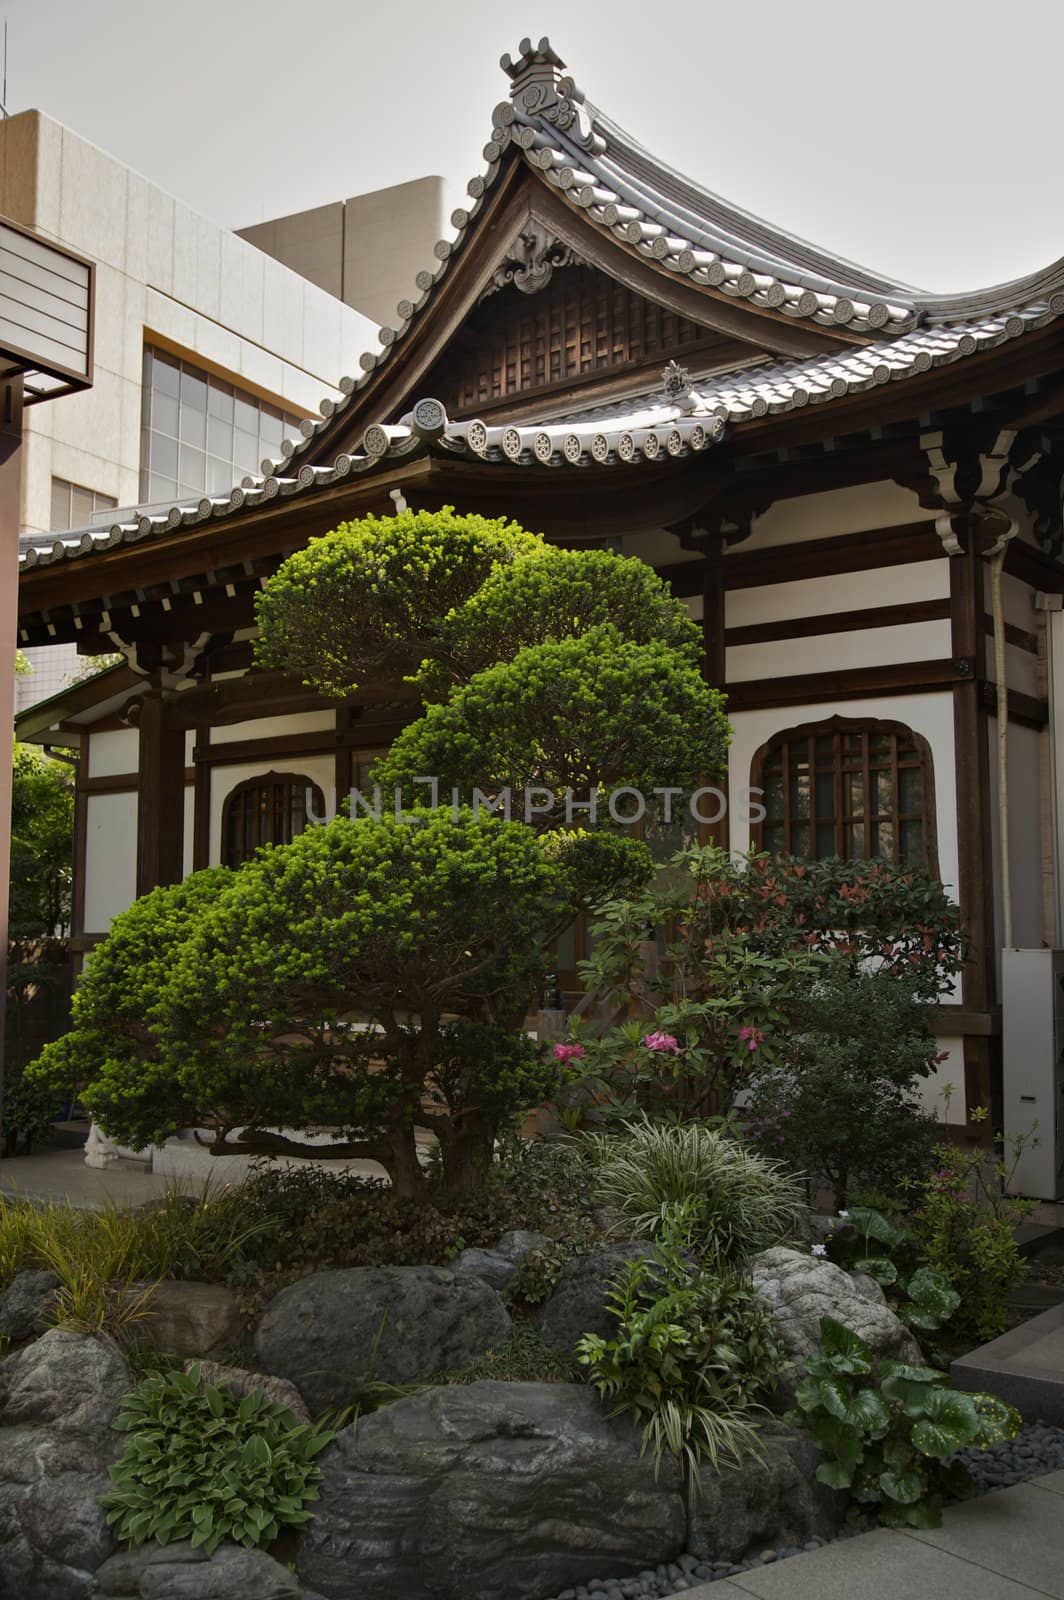 Japanese temple with a designered garden in Tokyo